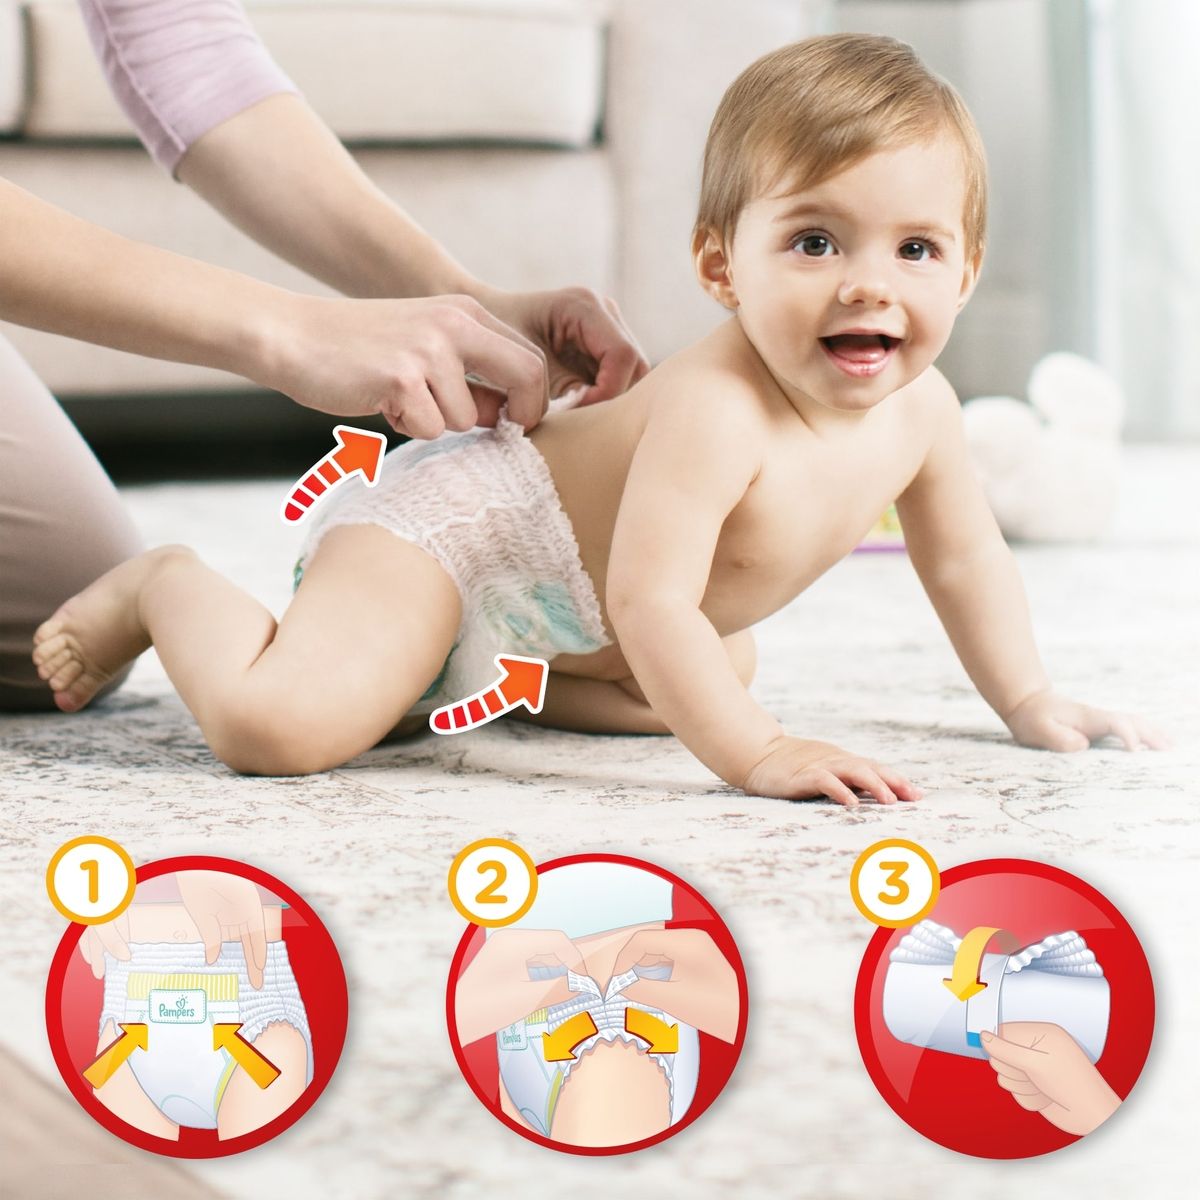 Pampers Pants  6-11   3 120 